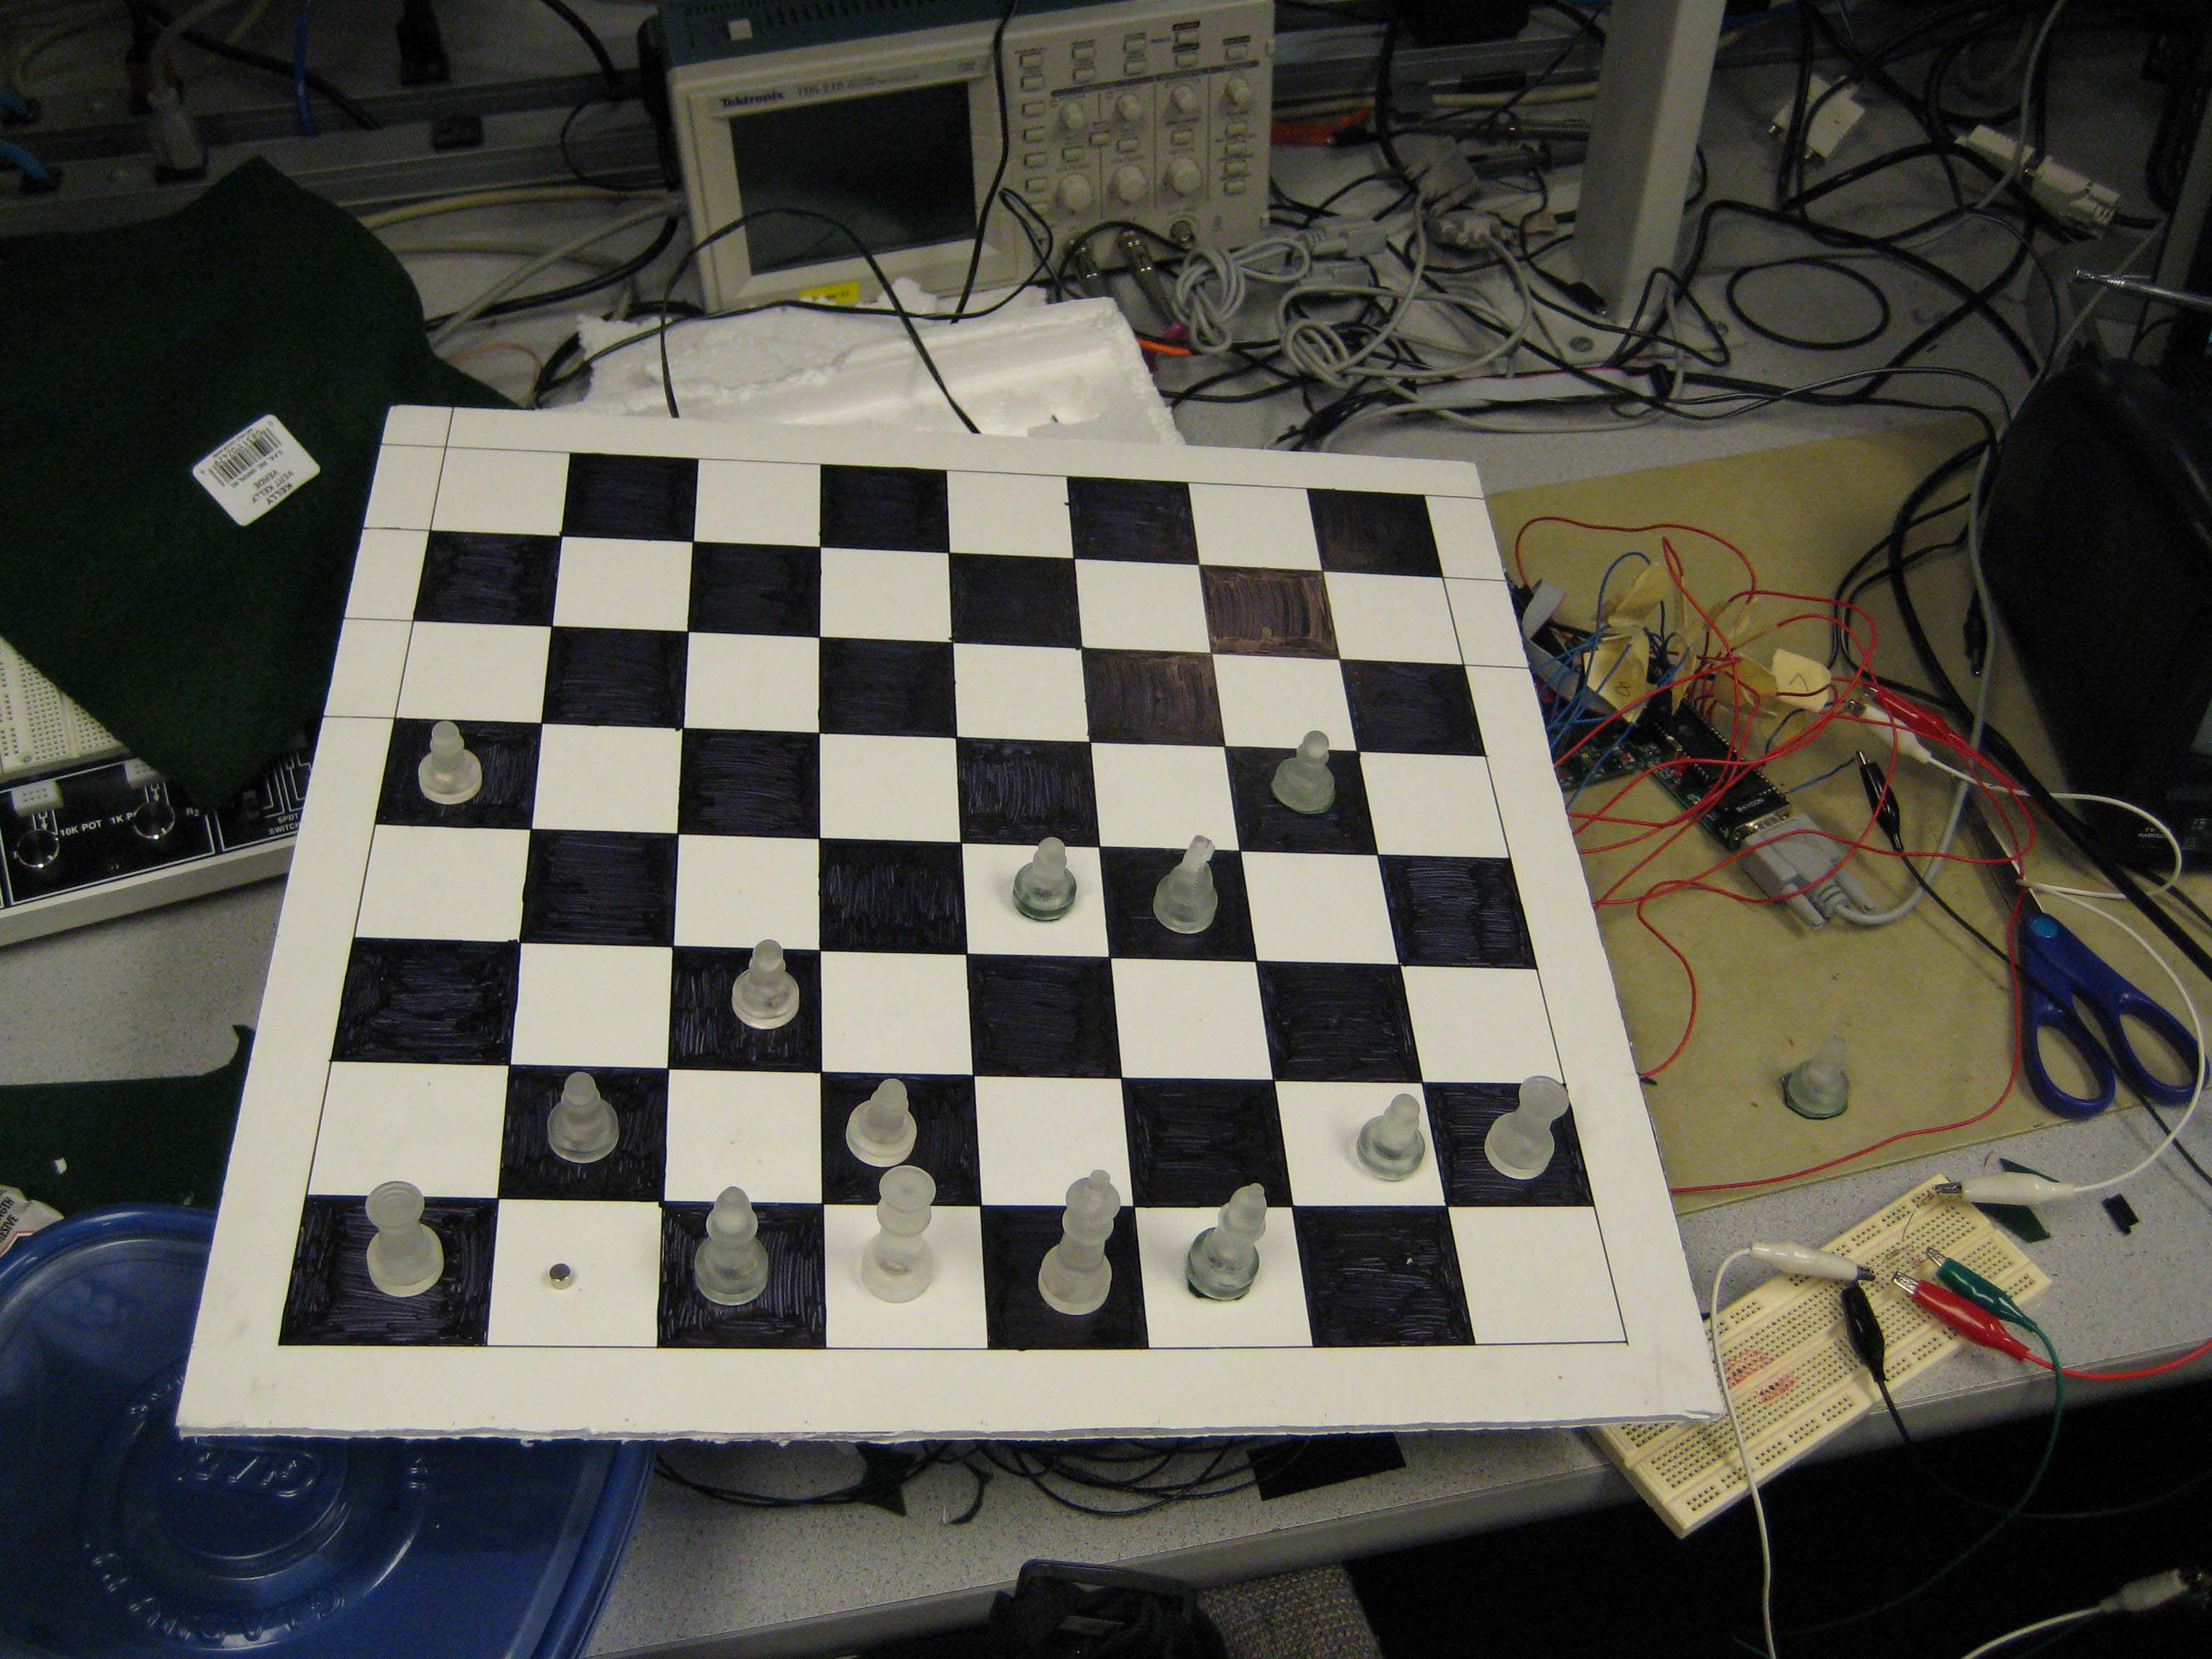 Students develop chess set for the visually impaired, Atmel